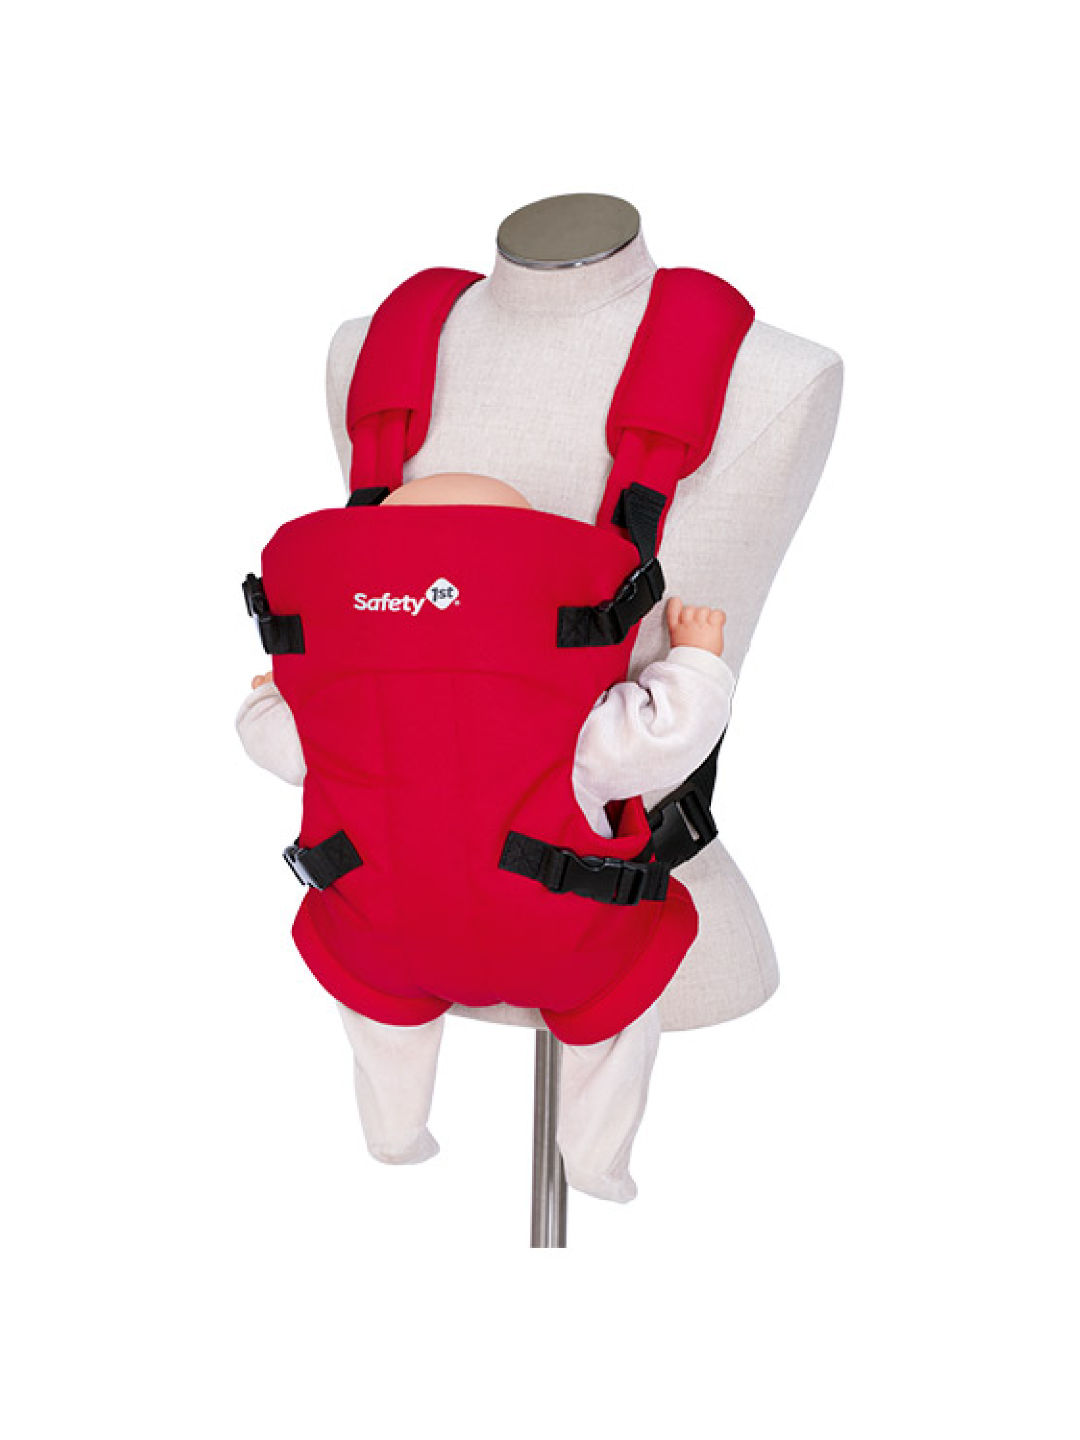 Safety 1st Mimoso Baby Carrier (Red- Image 1)